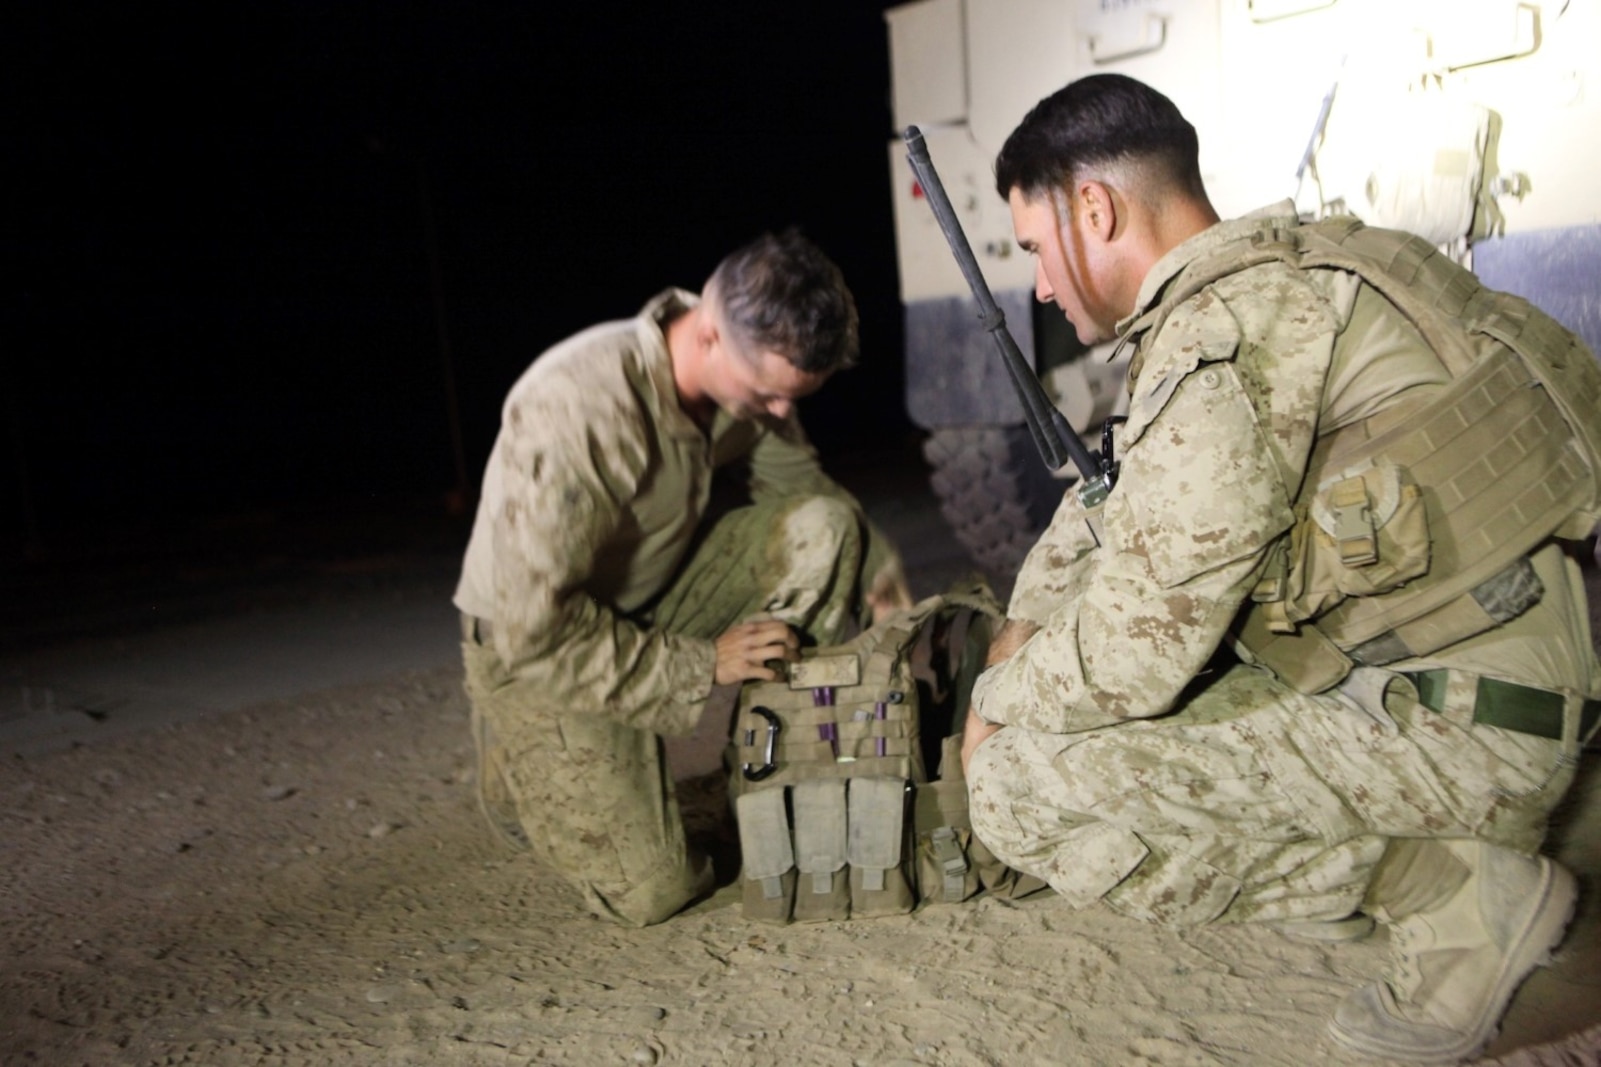 Sergeant Dominic Sharpsteensurina, right, a native of Apple Valley, California, and an assault section leader with Weapons Platoon, Charley Company, 1st Battalion, 7th Marine Regiment, inspects another Marine’s gear aboard Camp Dwyer, Helmand province, Afghanistan, Sept. 21, 2014. During his current deployment in Afghanistan, Sharpsteensurina was meritoriously promoted to the rank of sergeant. He is glad to be able to take part in Operation Enduring Freedom with his fellow infantrymen and become someone they can look up to. (U.S. Marine Corps photo by Cpl. Cody Haas/ Released)